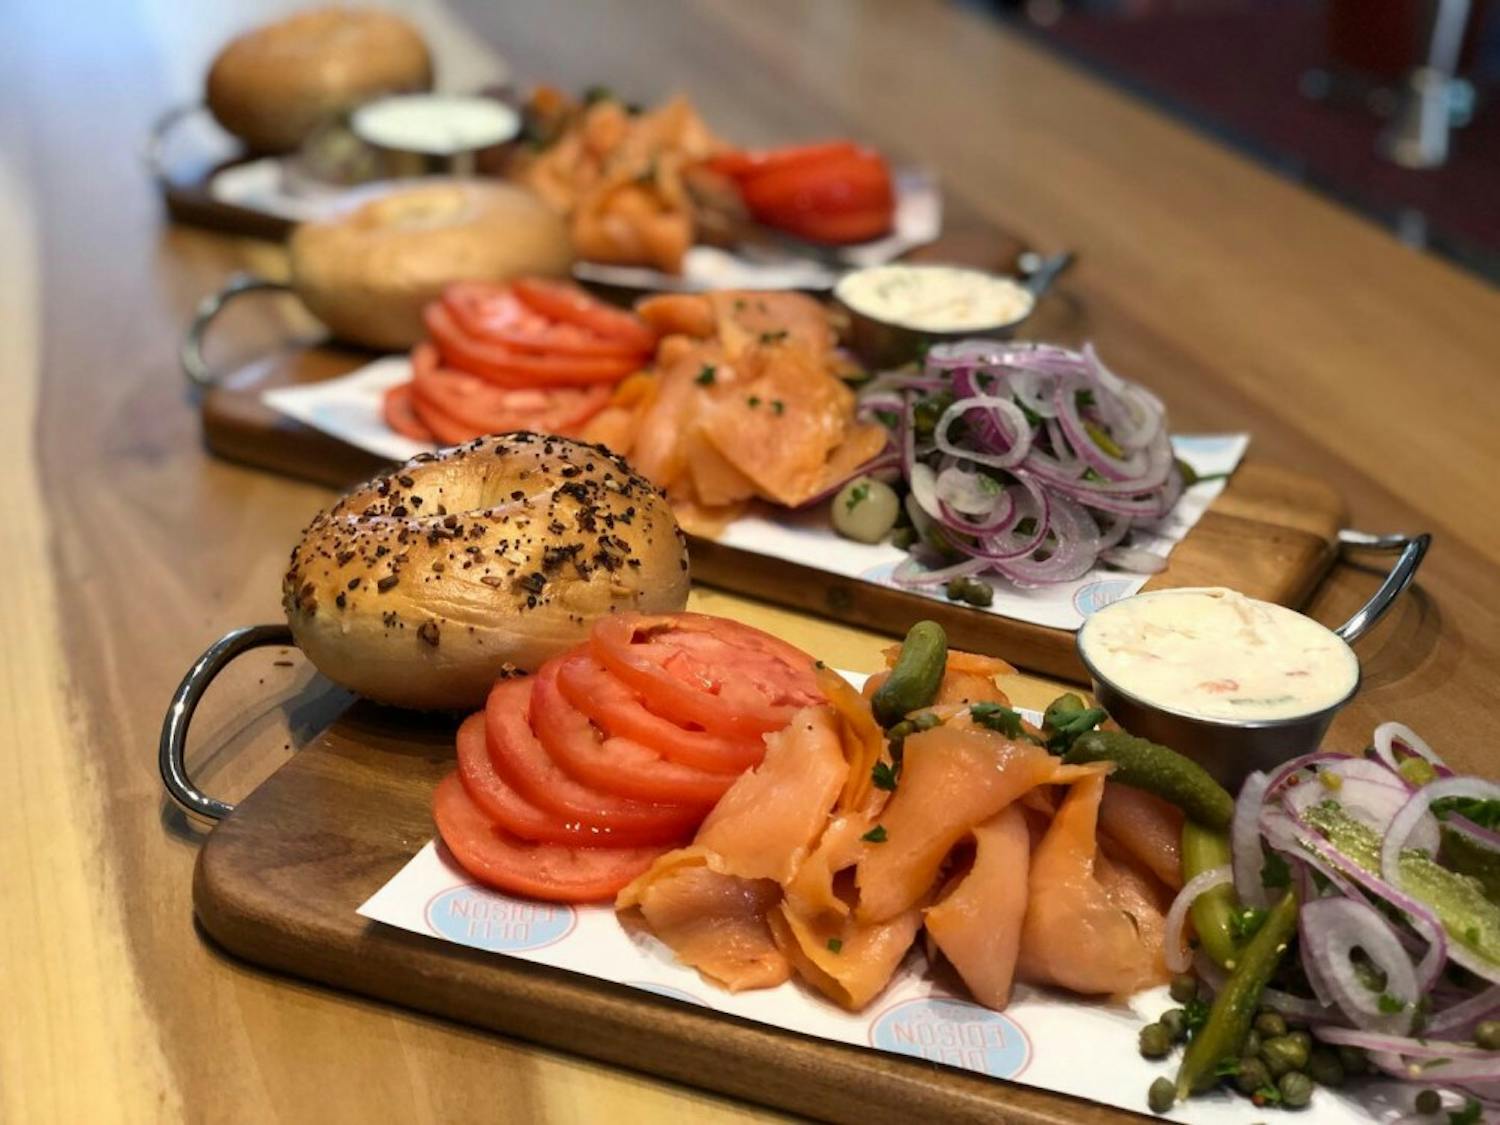 Deli Edison, soon to open in Chapel Hill, will serve handmade bagels every day. Photo courtesy of Dan Obusan.